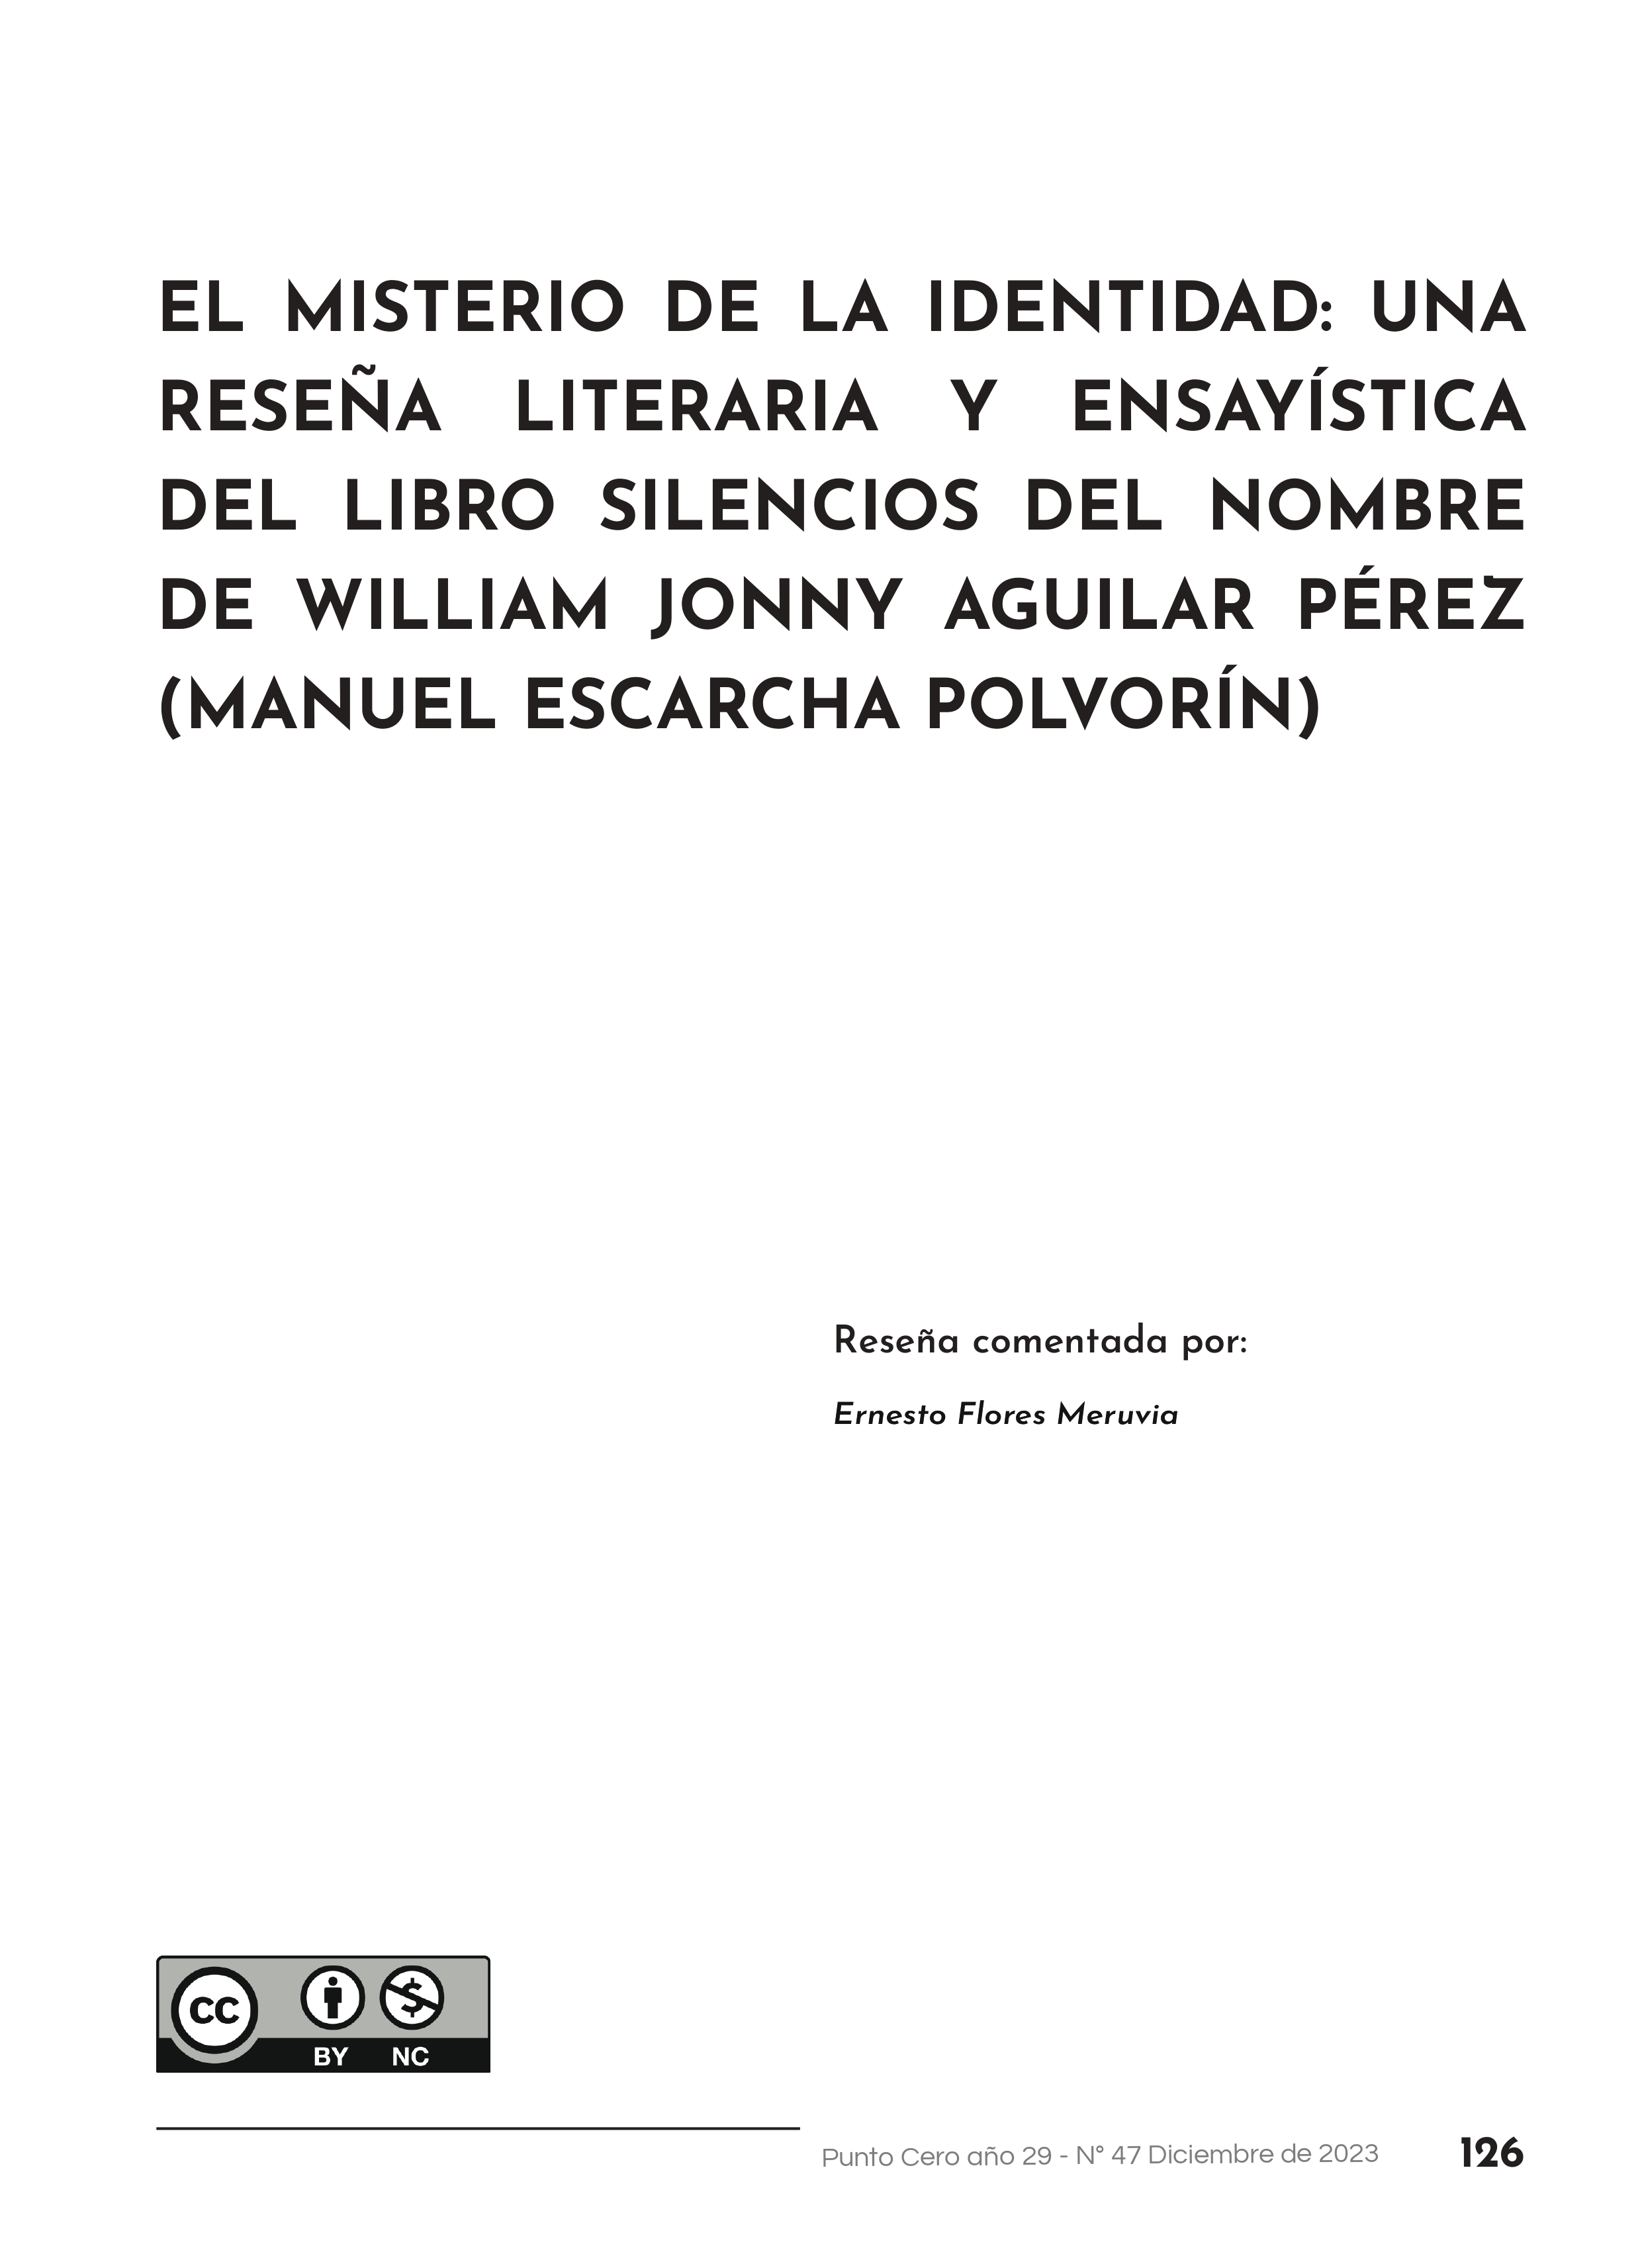 The mistery of identity: a literary and essay review of the book silences of the name by William Jonny Aguilar Pérez (Manuel Escarcha Polvorín)  